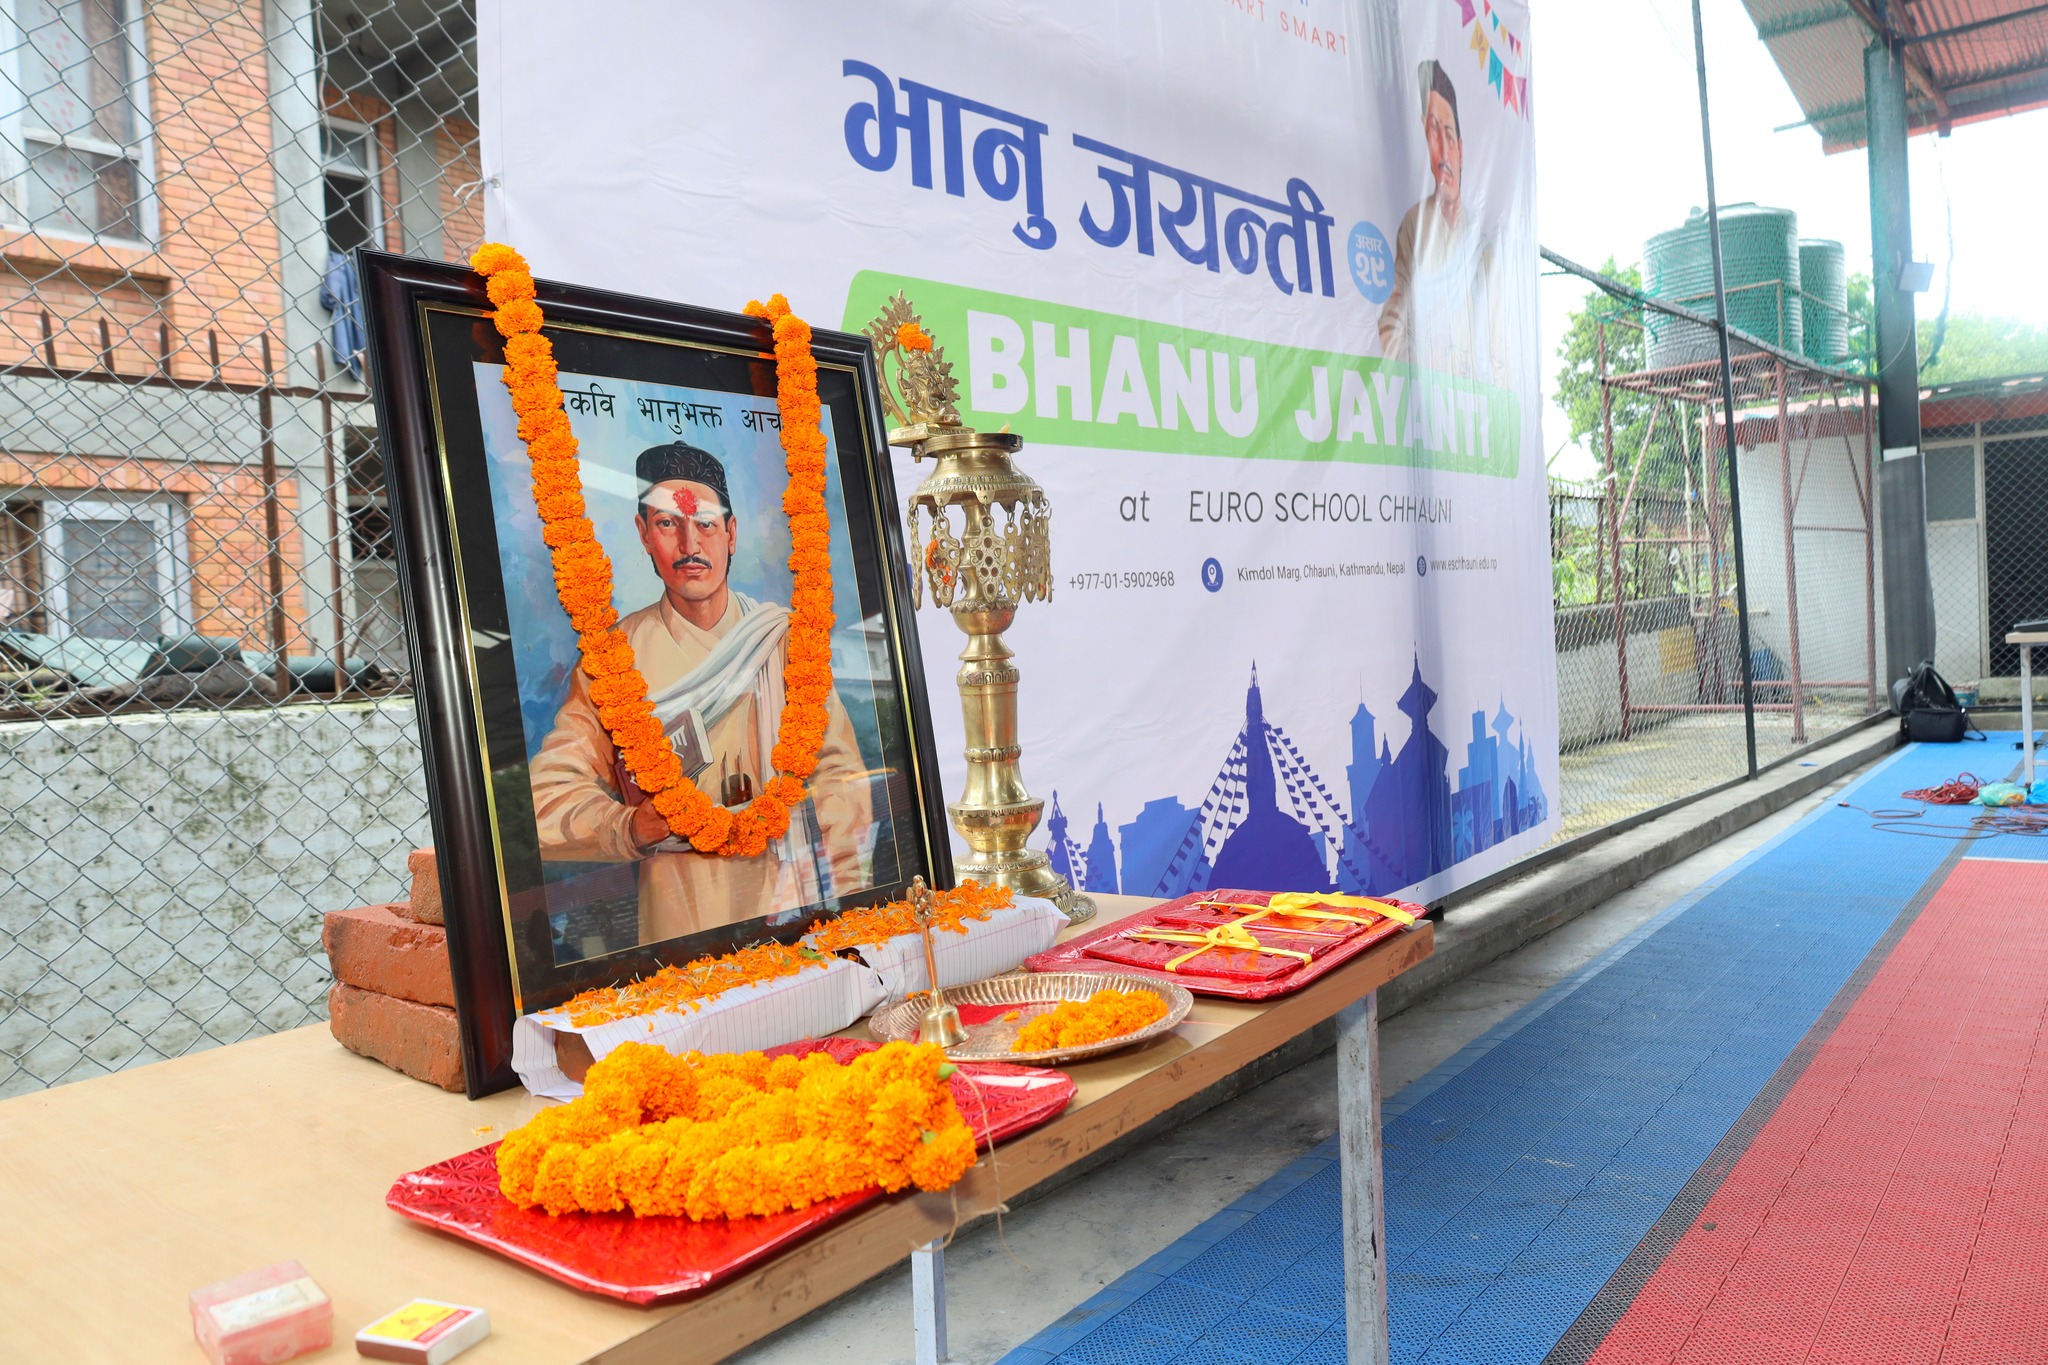 211th Bhanu Jayanti and Oratory Competition